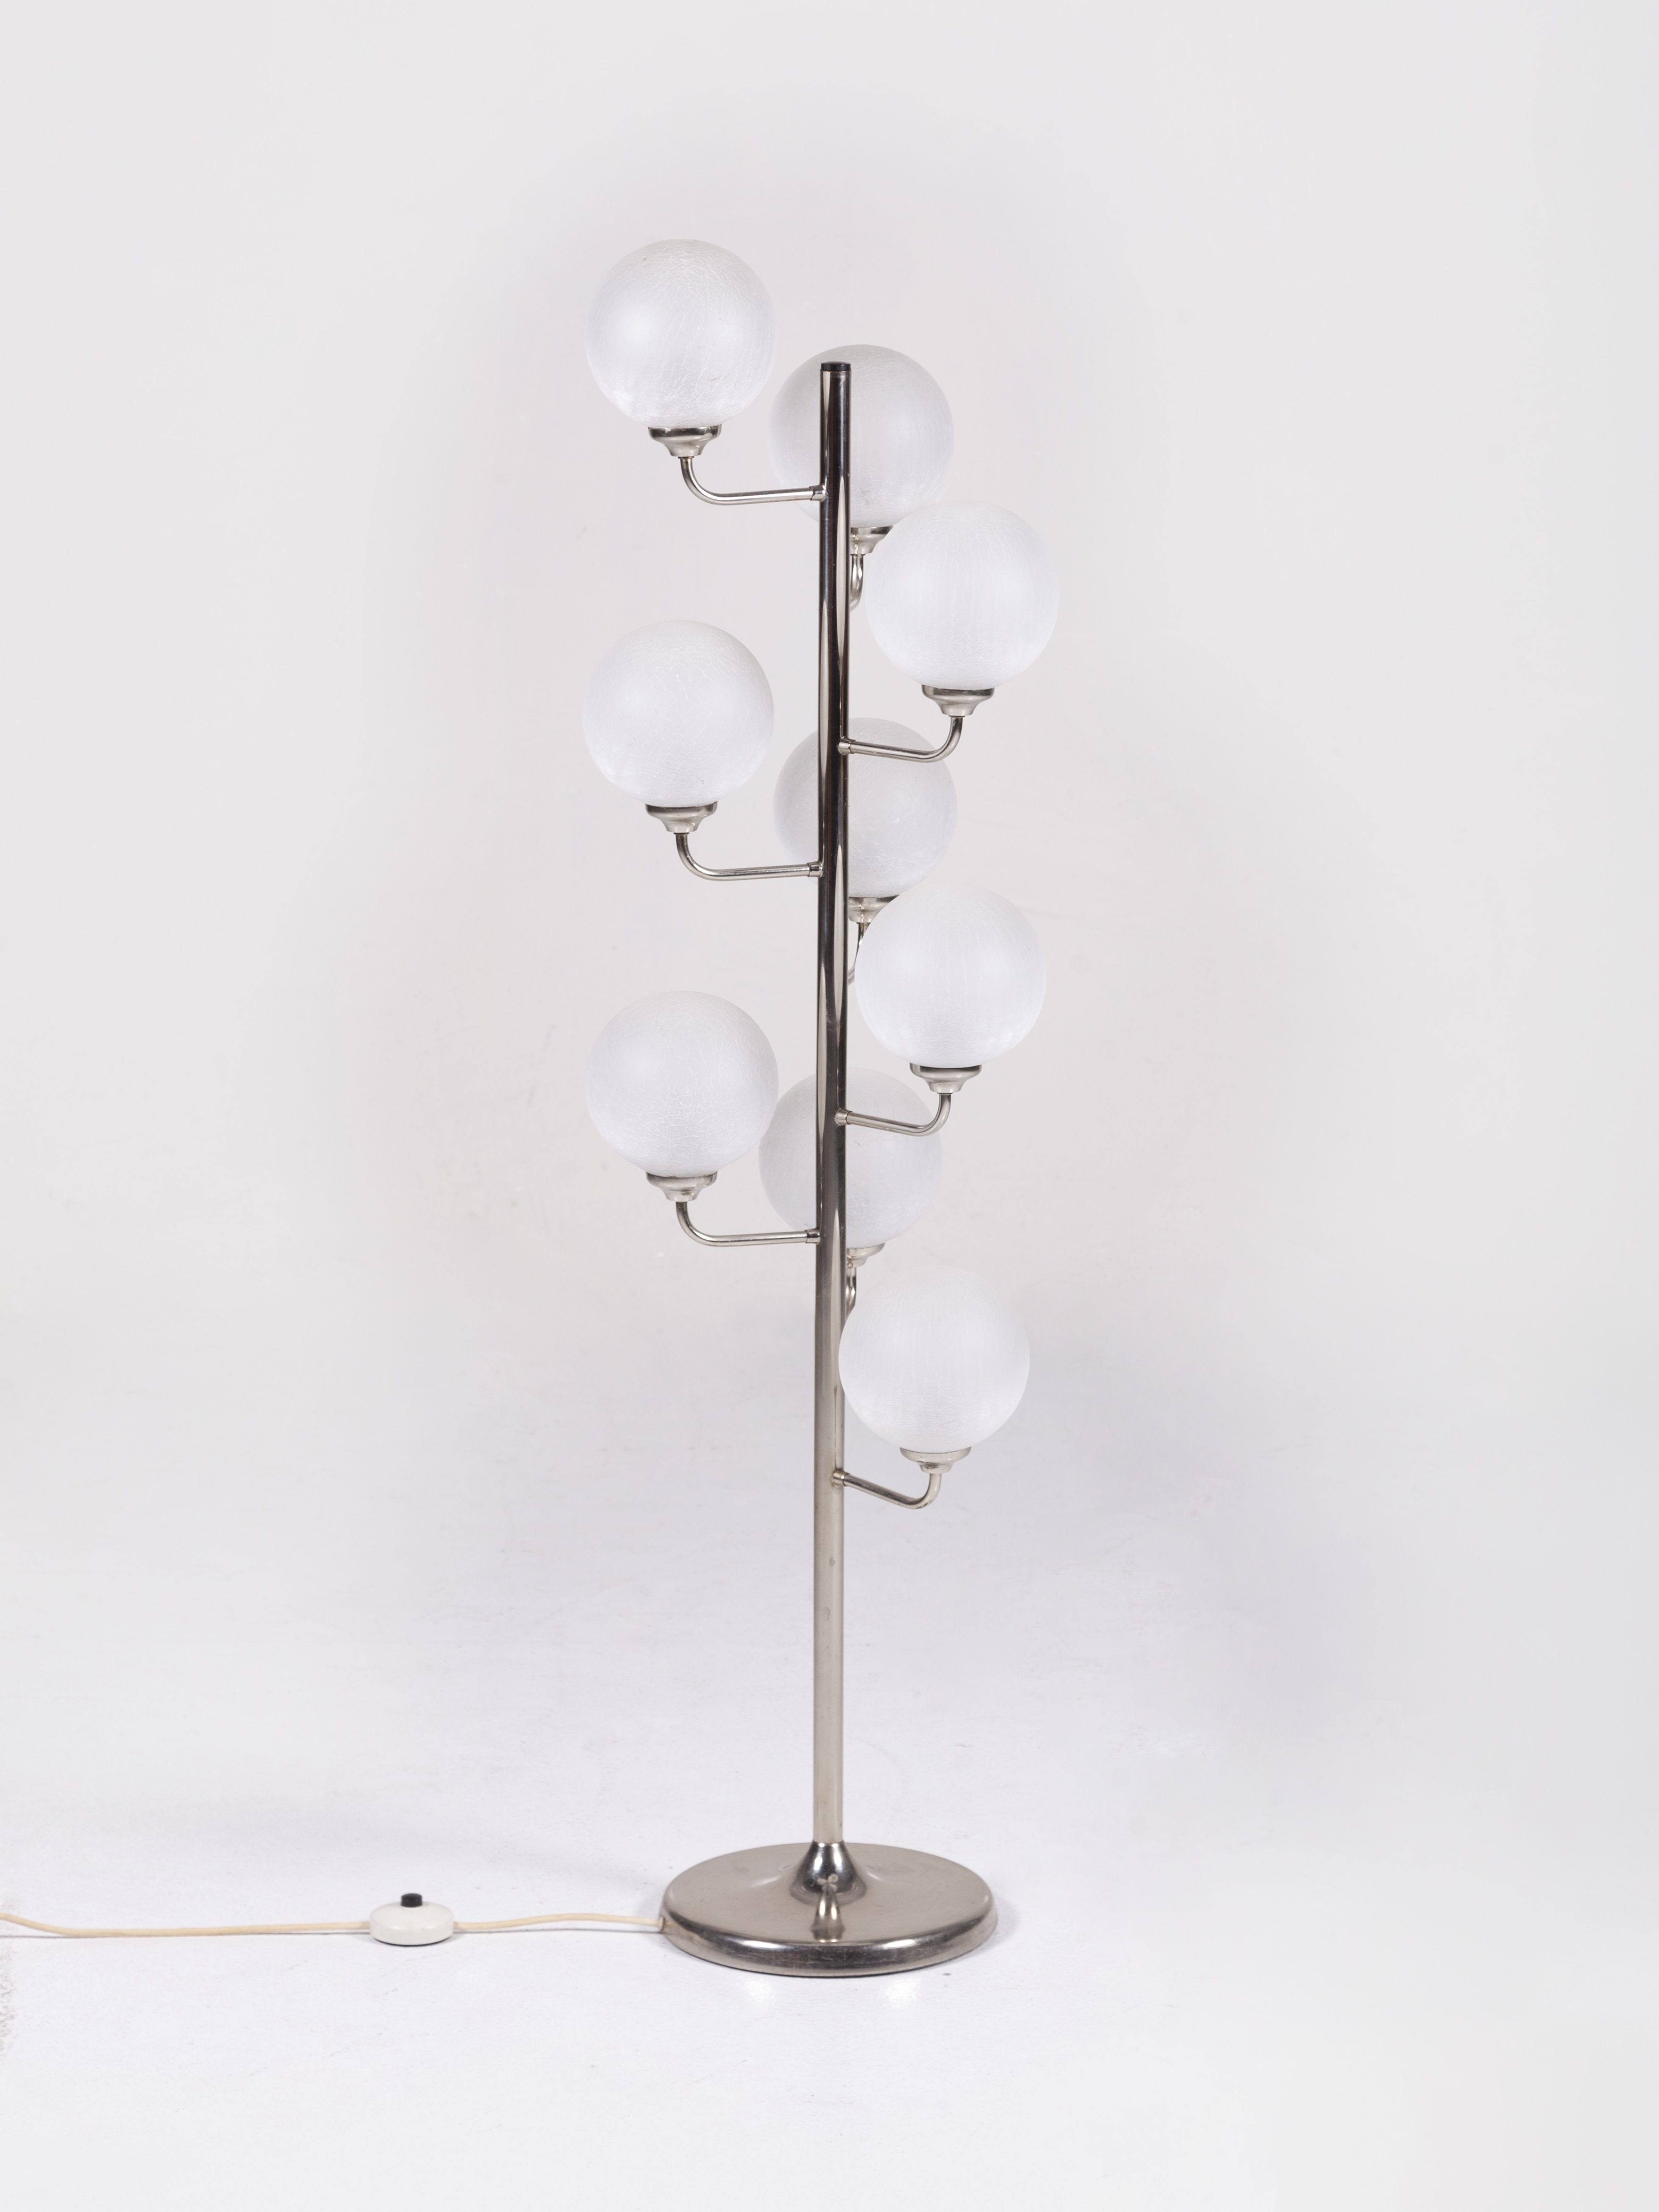 Space Age Glass Vintage Floor Lamp From Pako 1960s Design Market